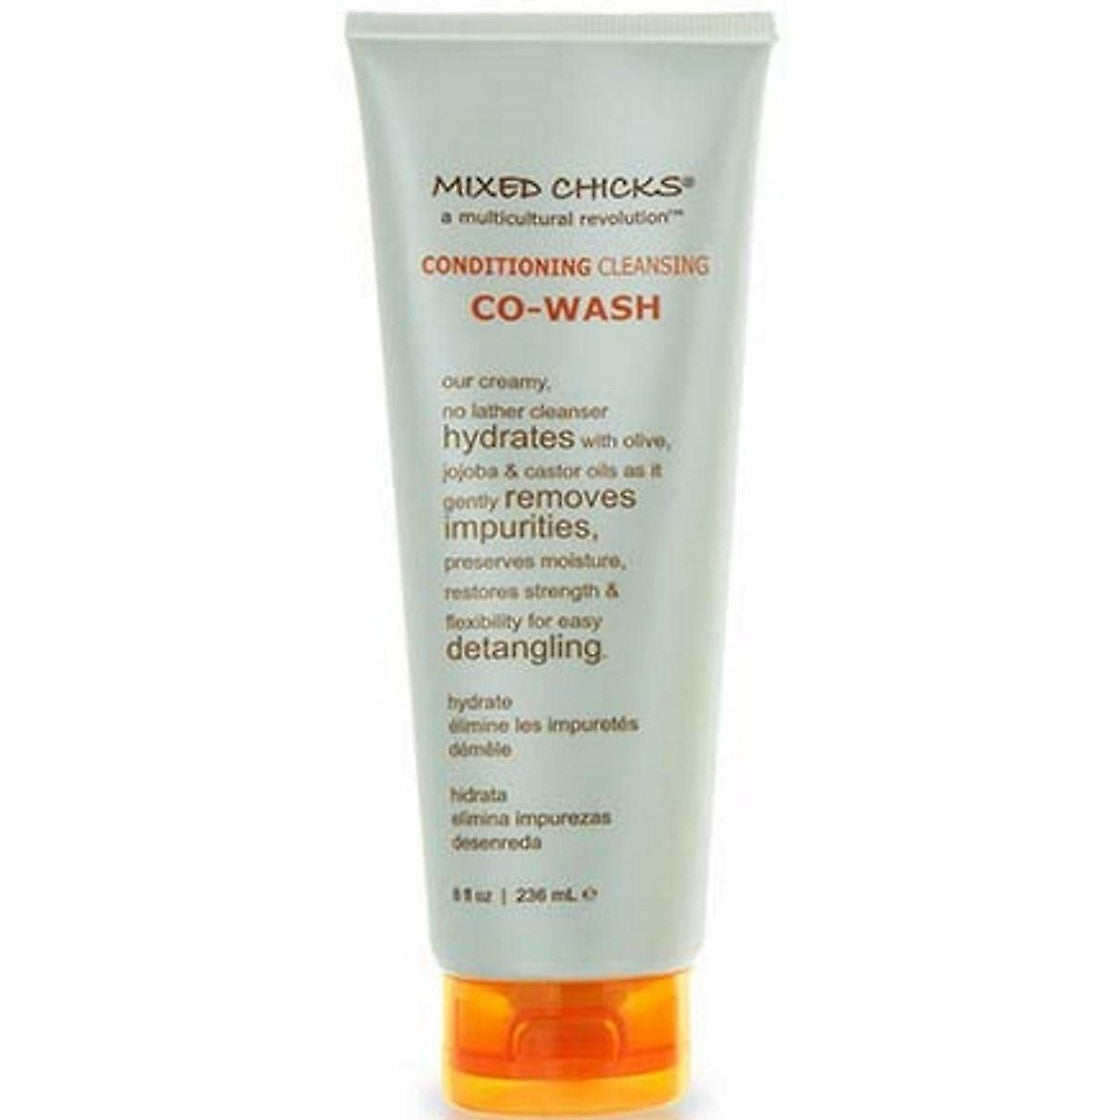 Mixed Chicks Conditioning Cleansing Co-Wash 8oz / 236ml